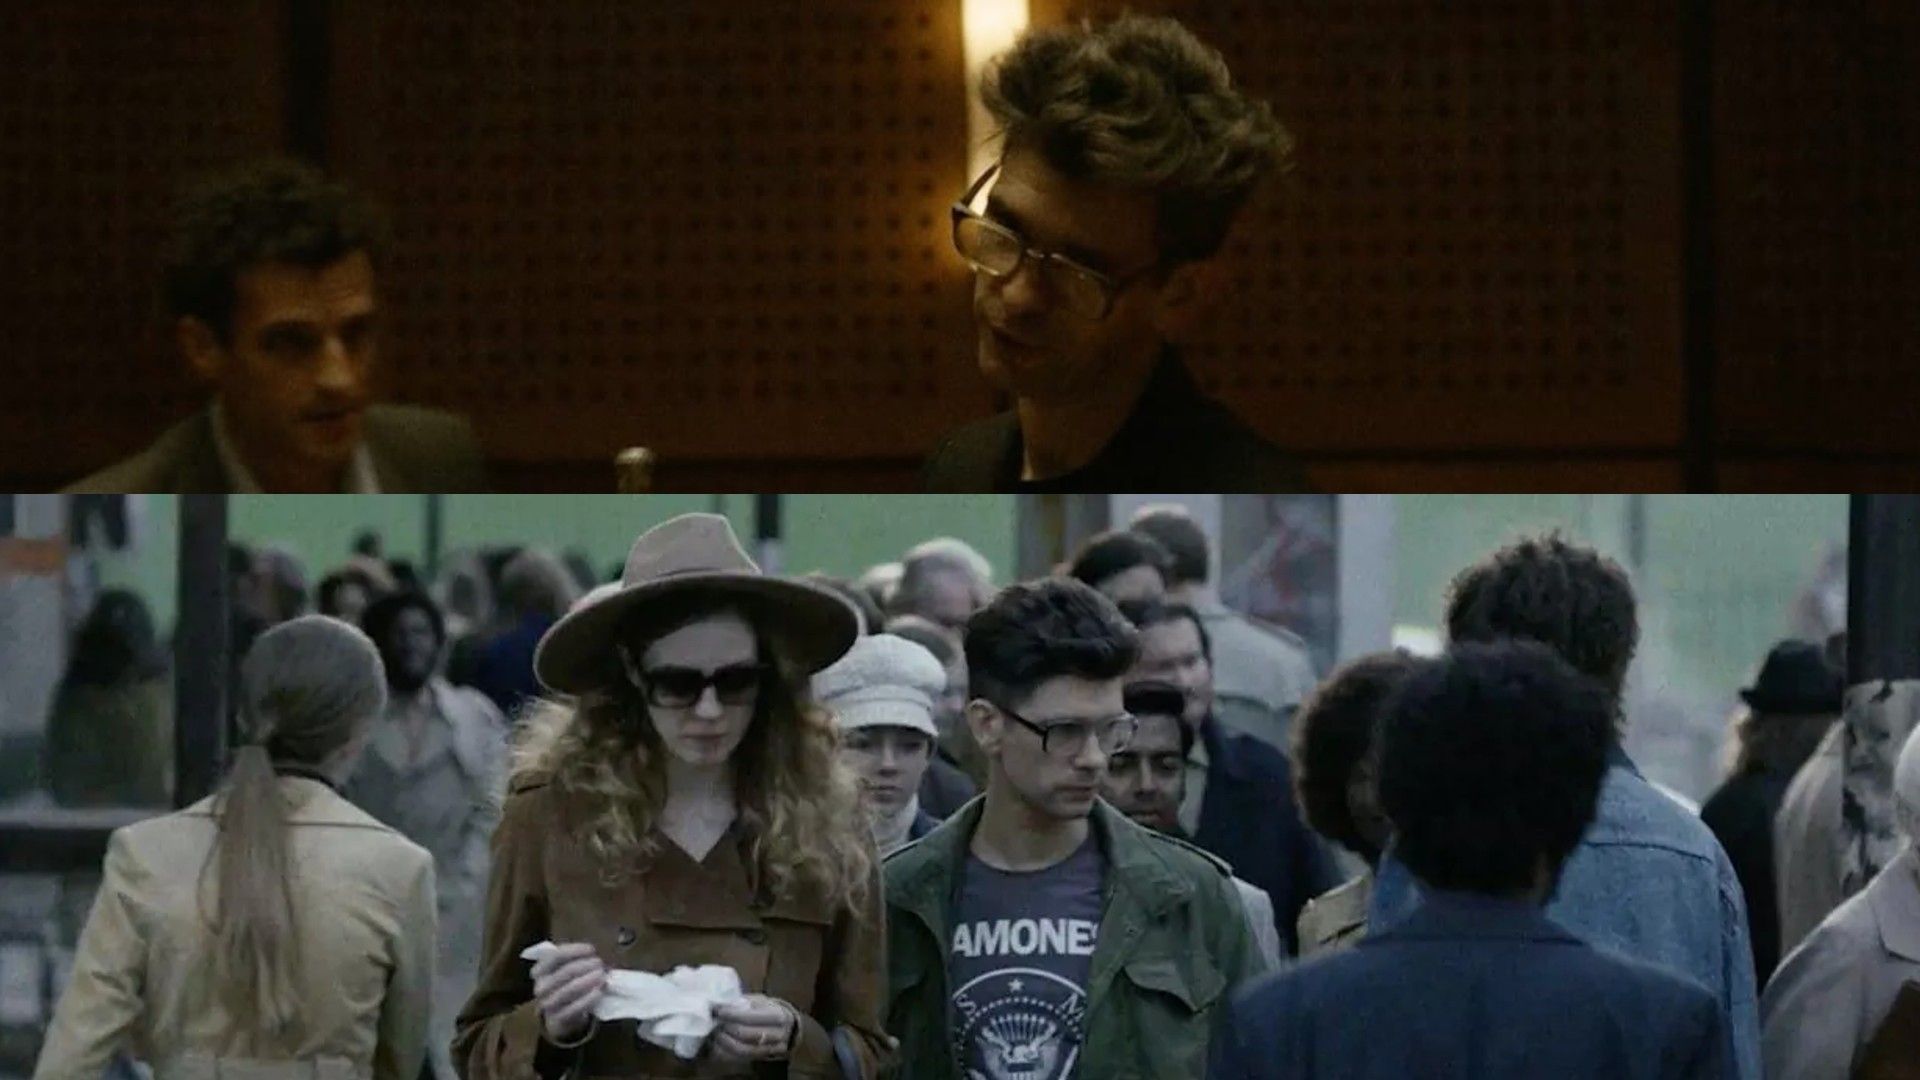 Ben Whishaw in the role of Eduard Limonov